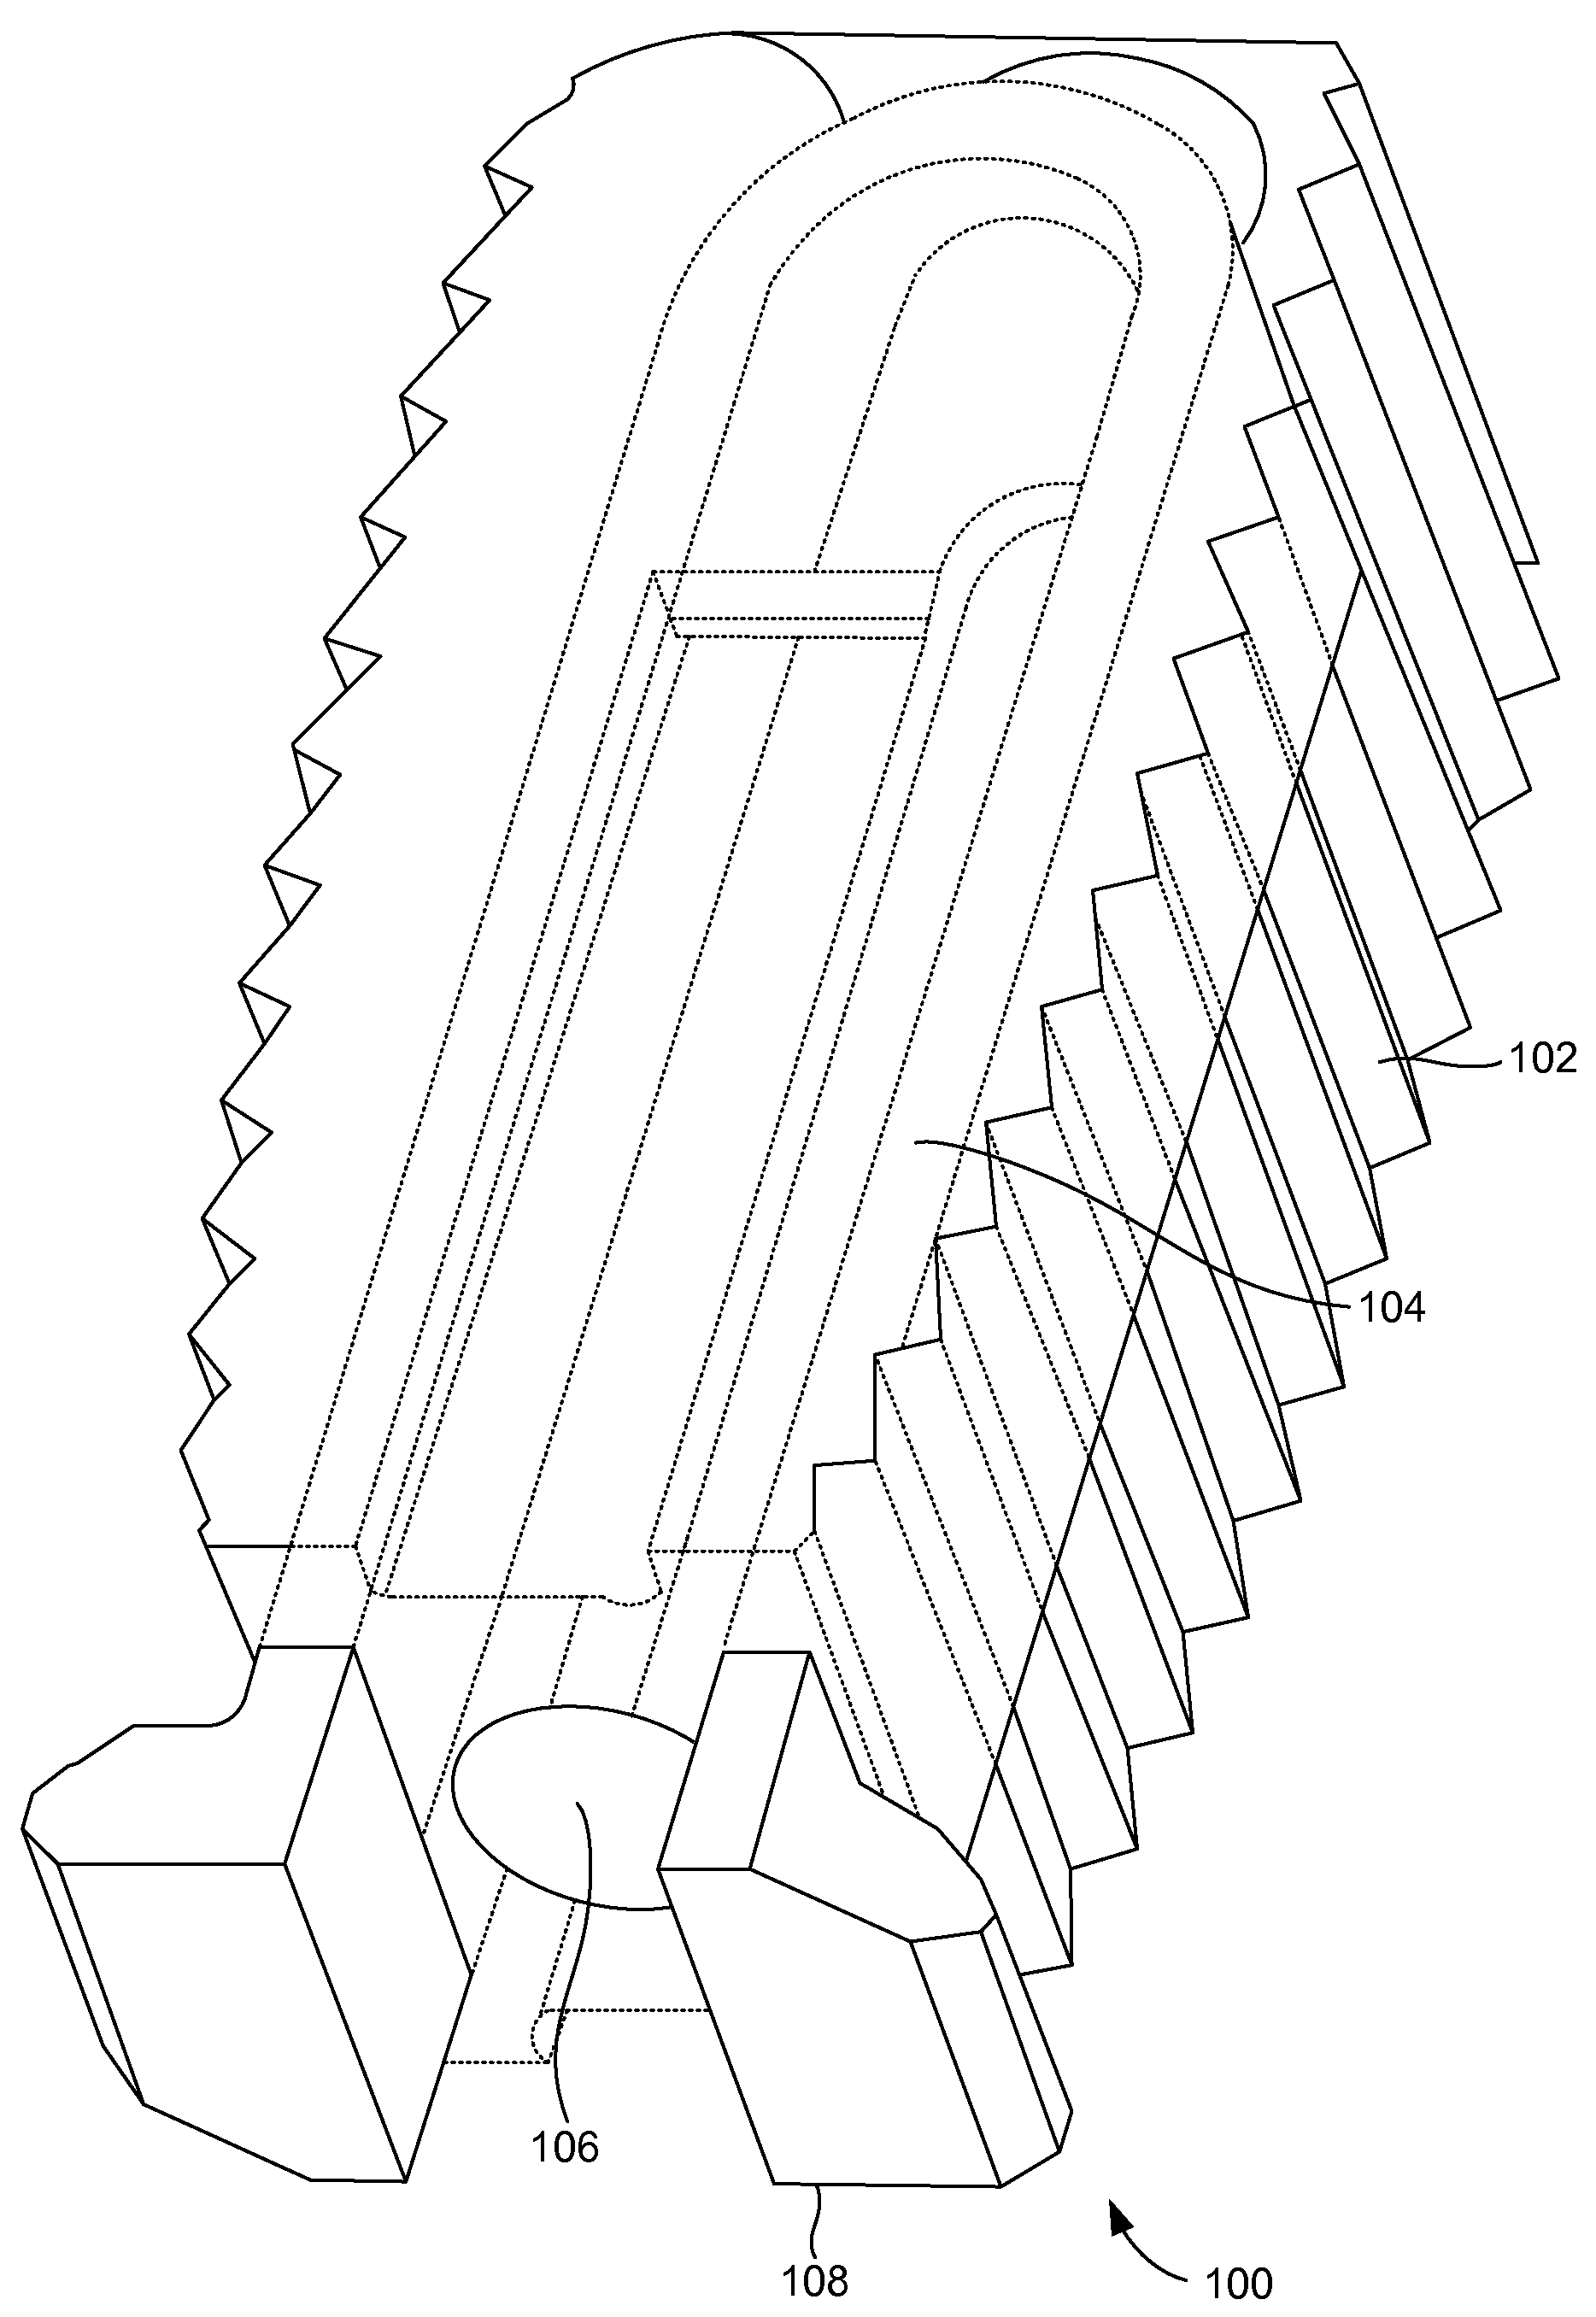 Compliant Interbody Fusion Device With Deployable Bone Anchors